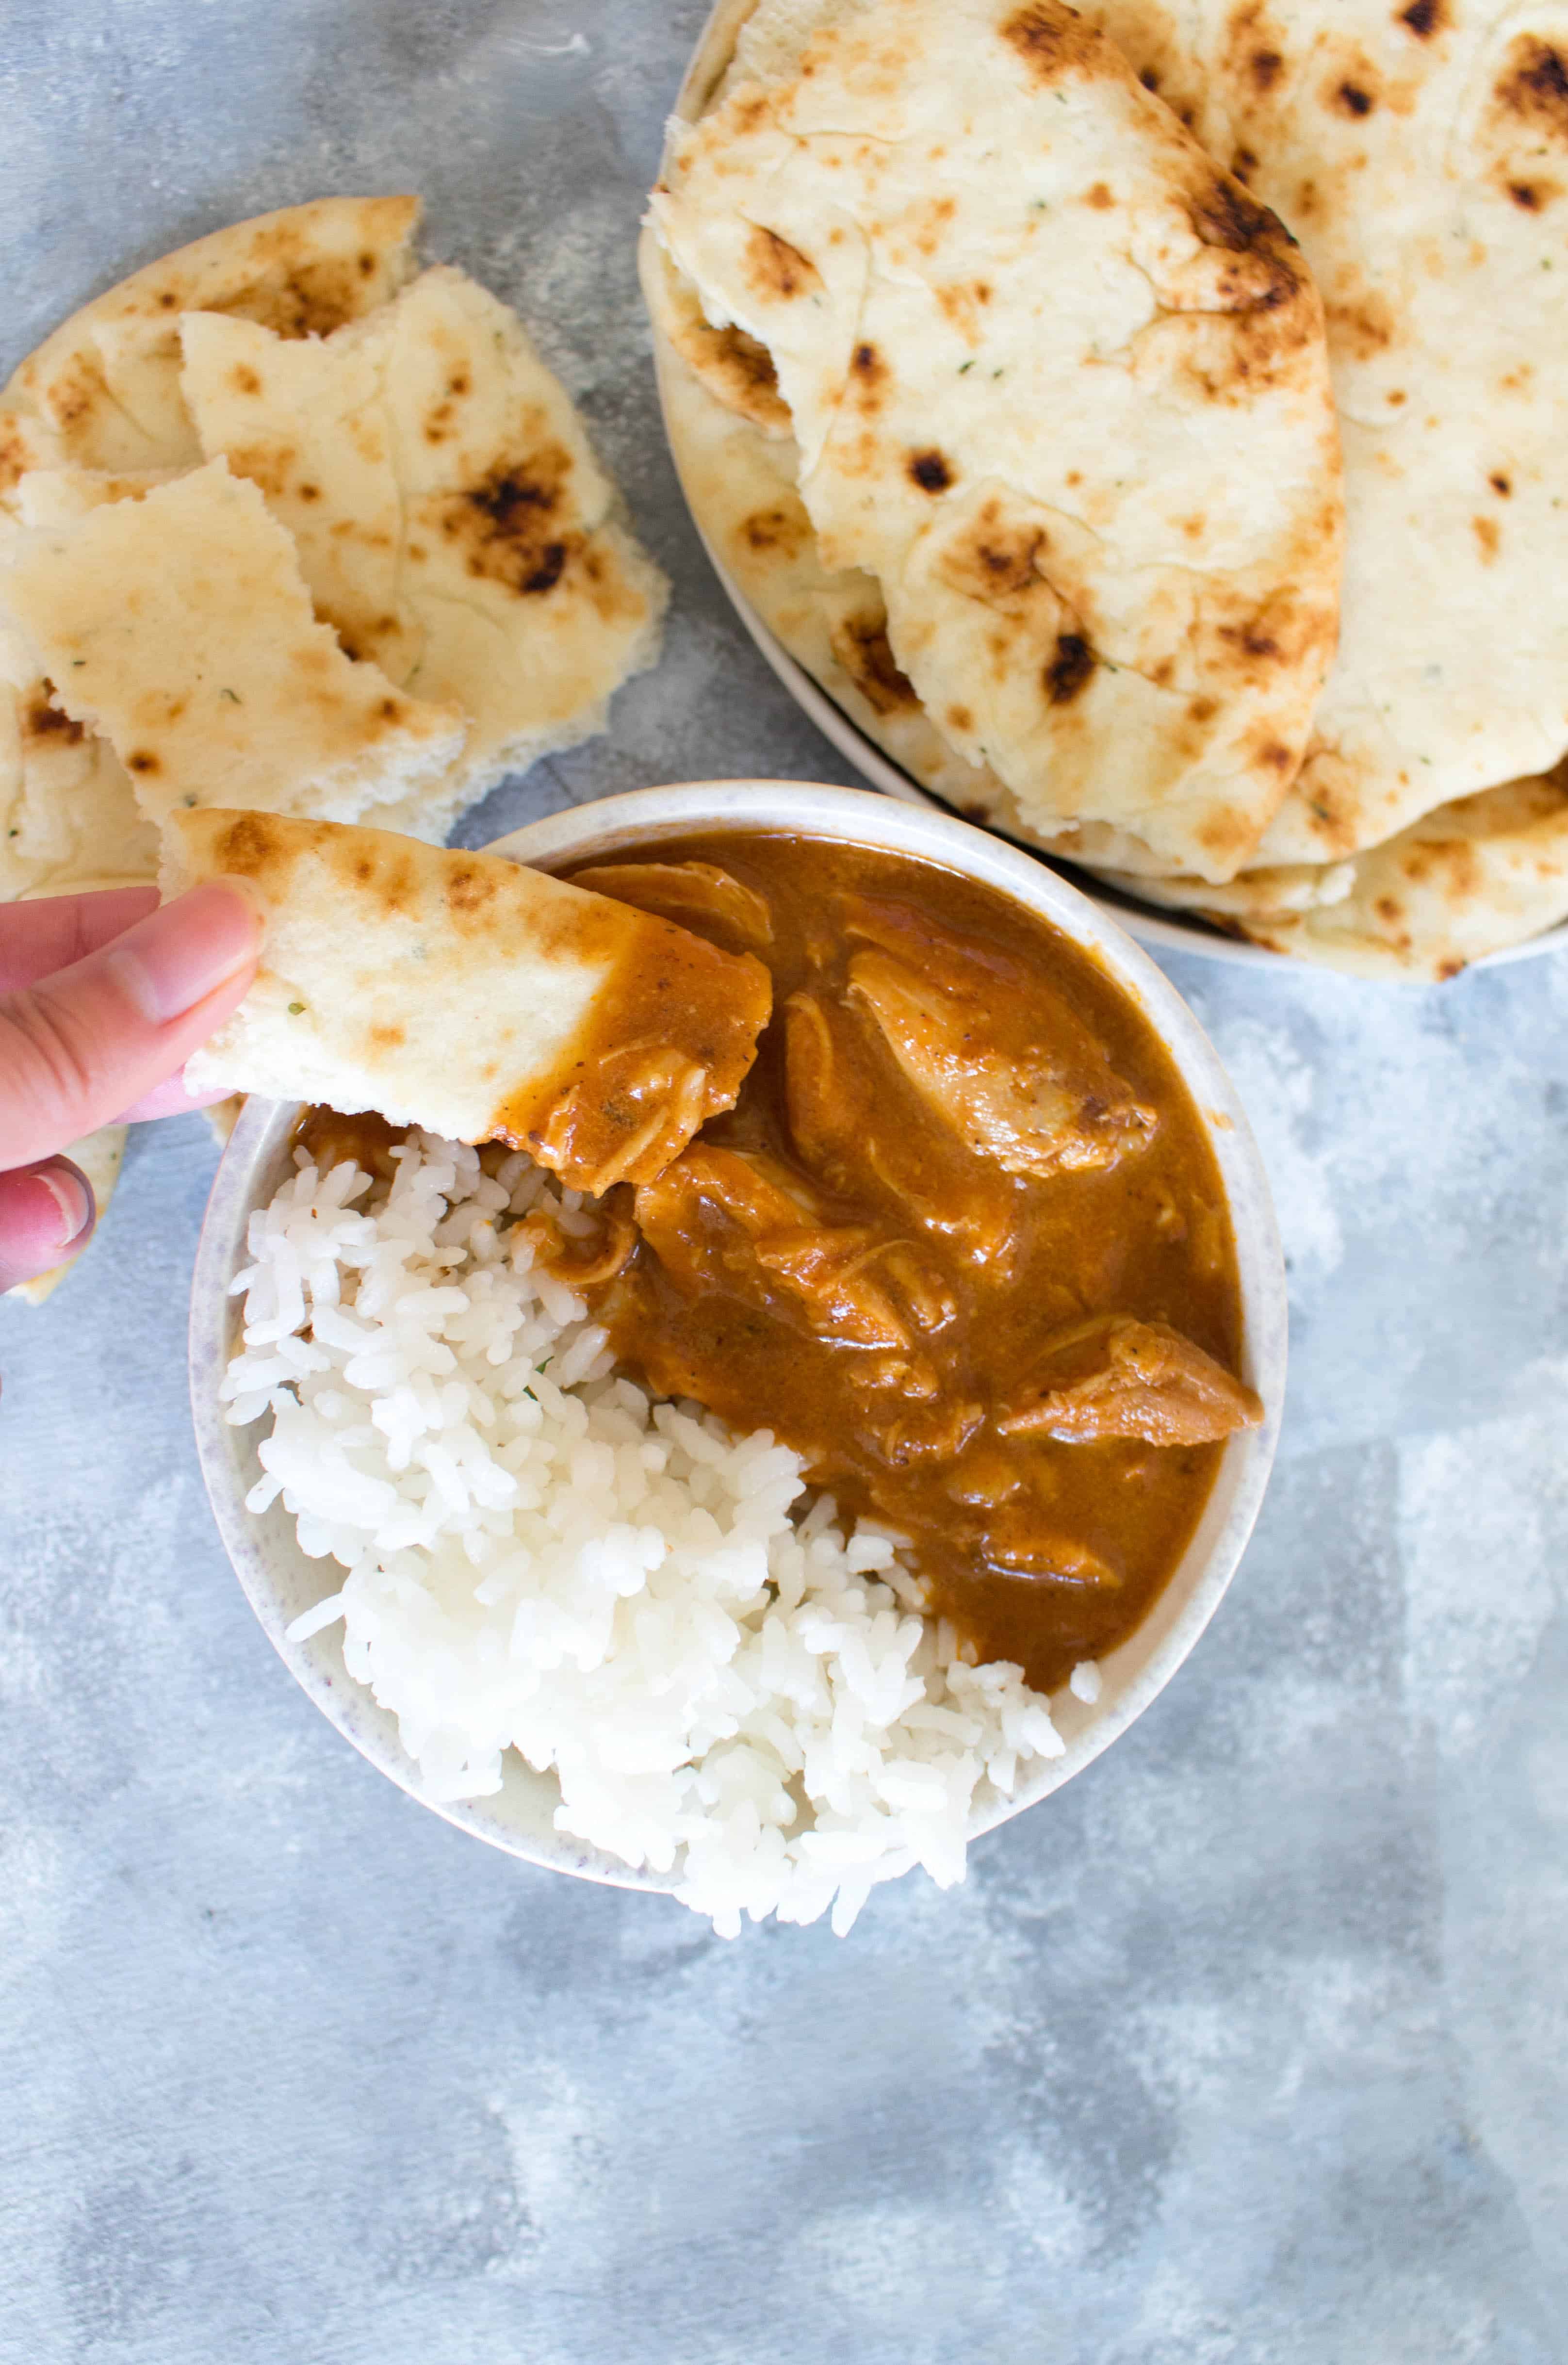 This Healthy Instant Pot Butter Chicken Recipe is a lightened up version that takes less than 30 minutes to make and is still rich and creamy.